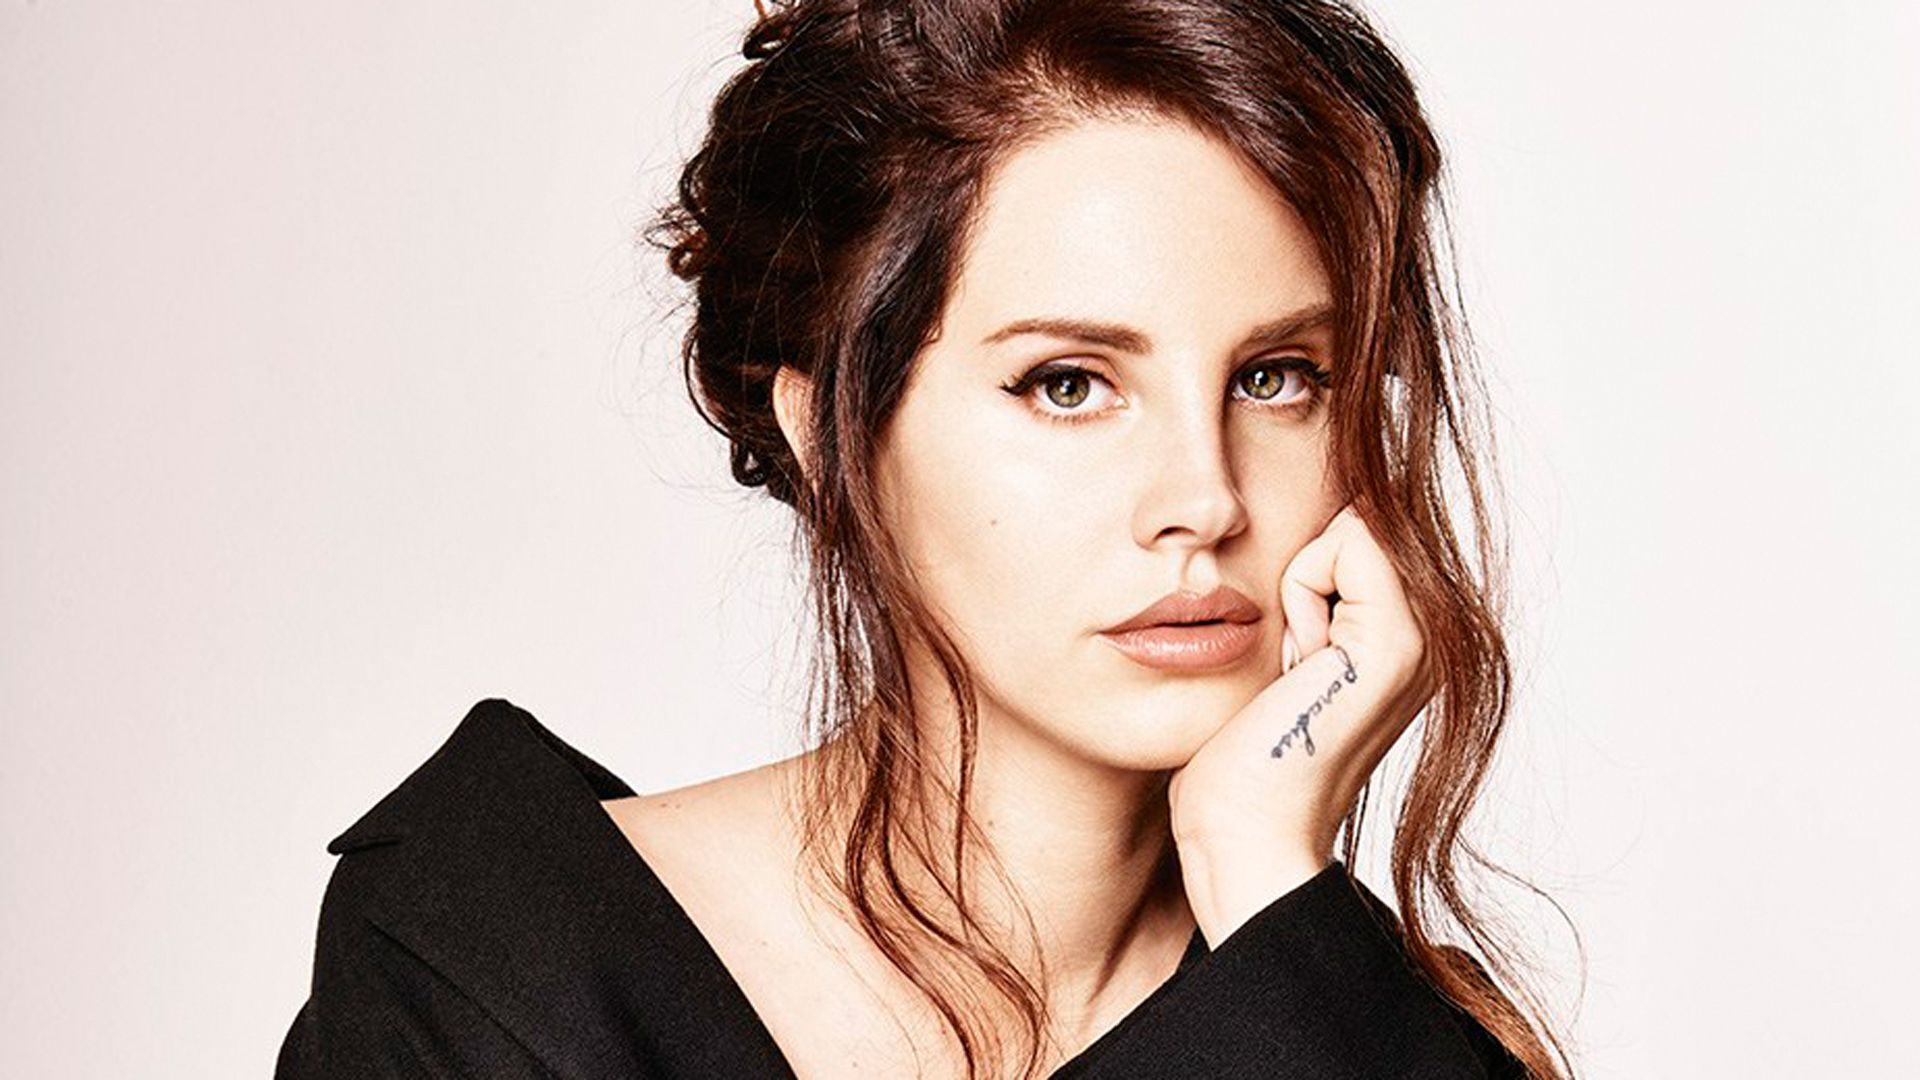 Tove Lo is one of the most successful Swedish artists of recent years. - Lana Del Rey